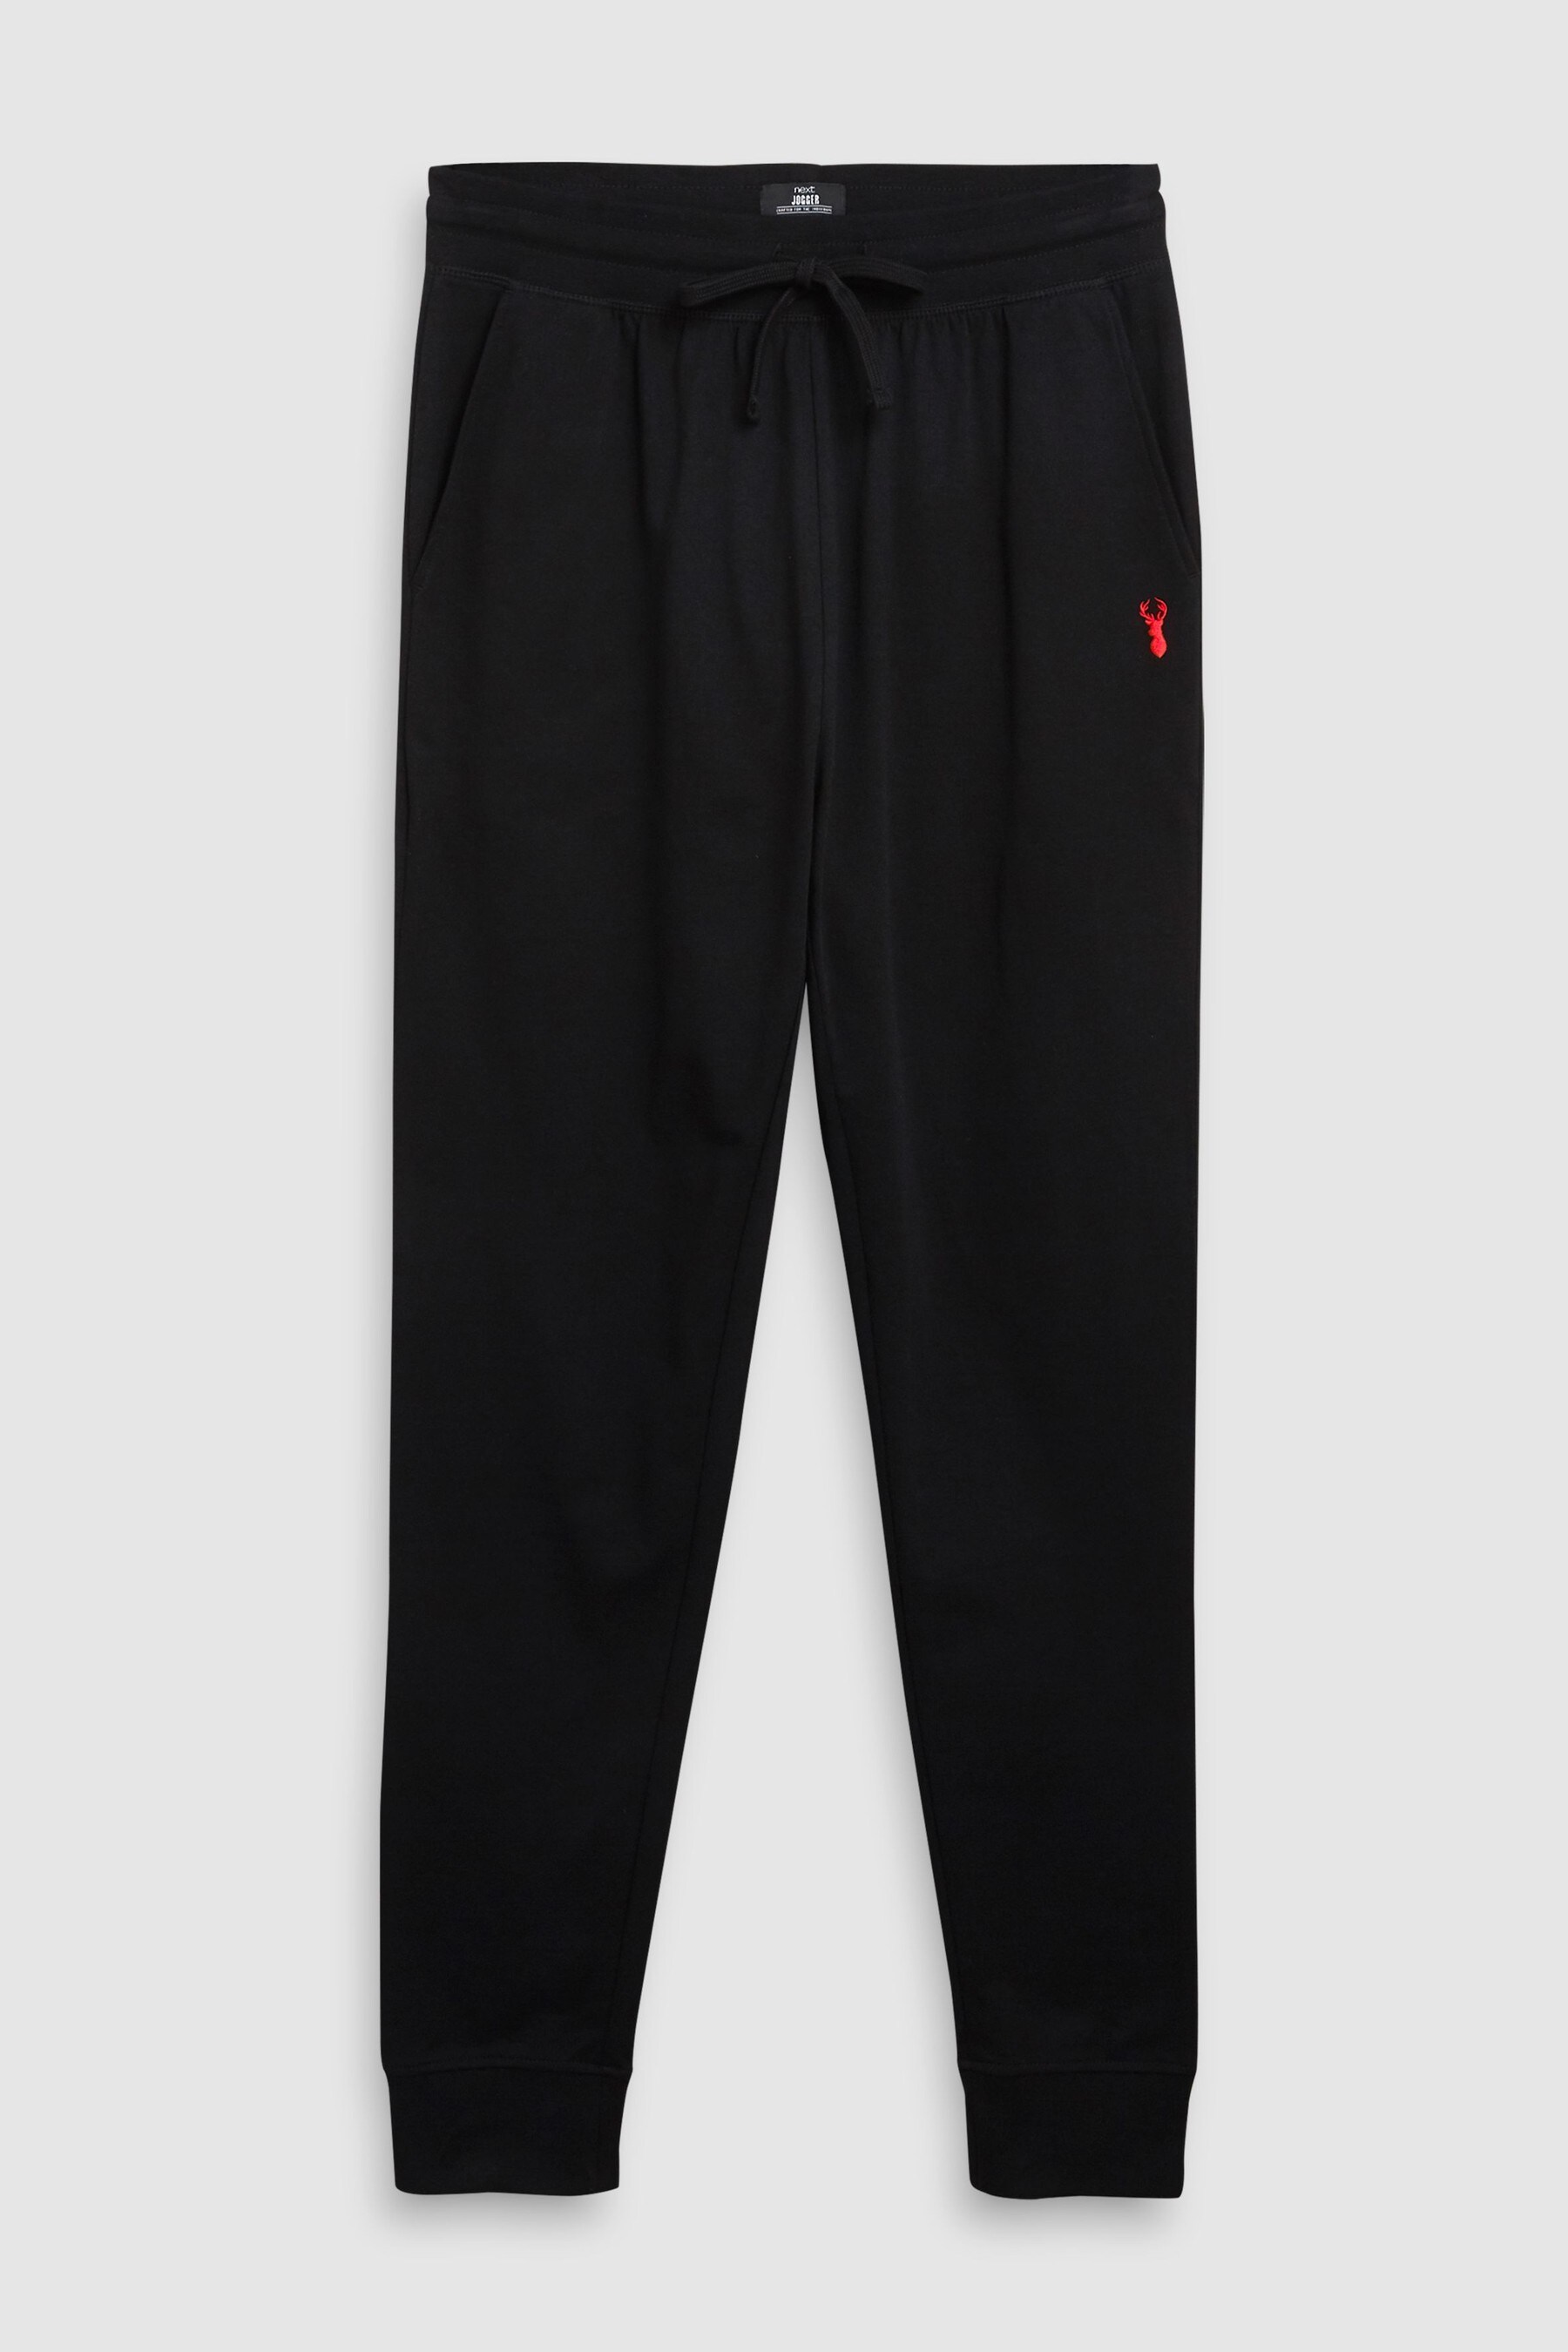 Buy Black Cuffed Slim Lightweight Joggers from the Next UK online shop